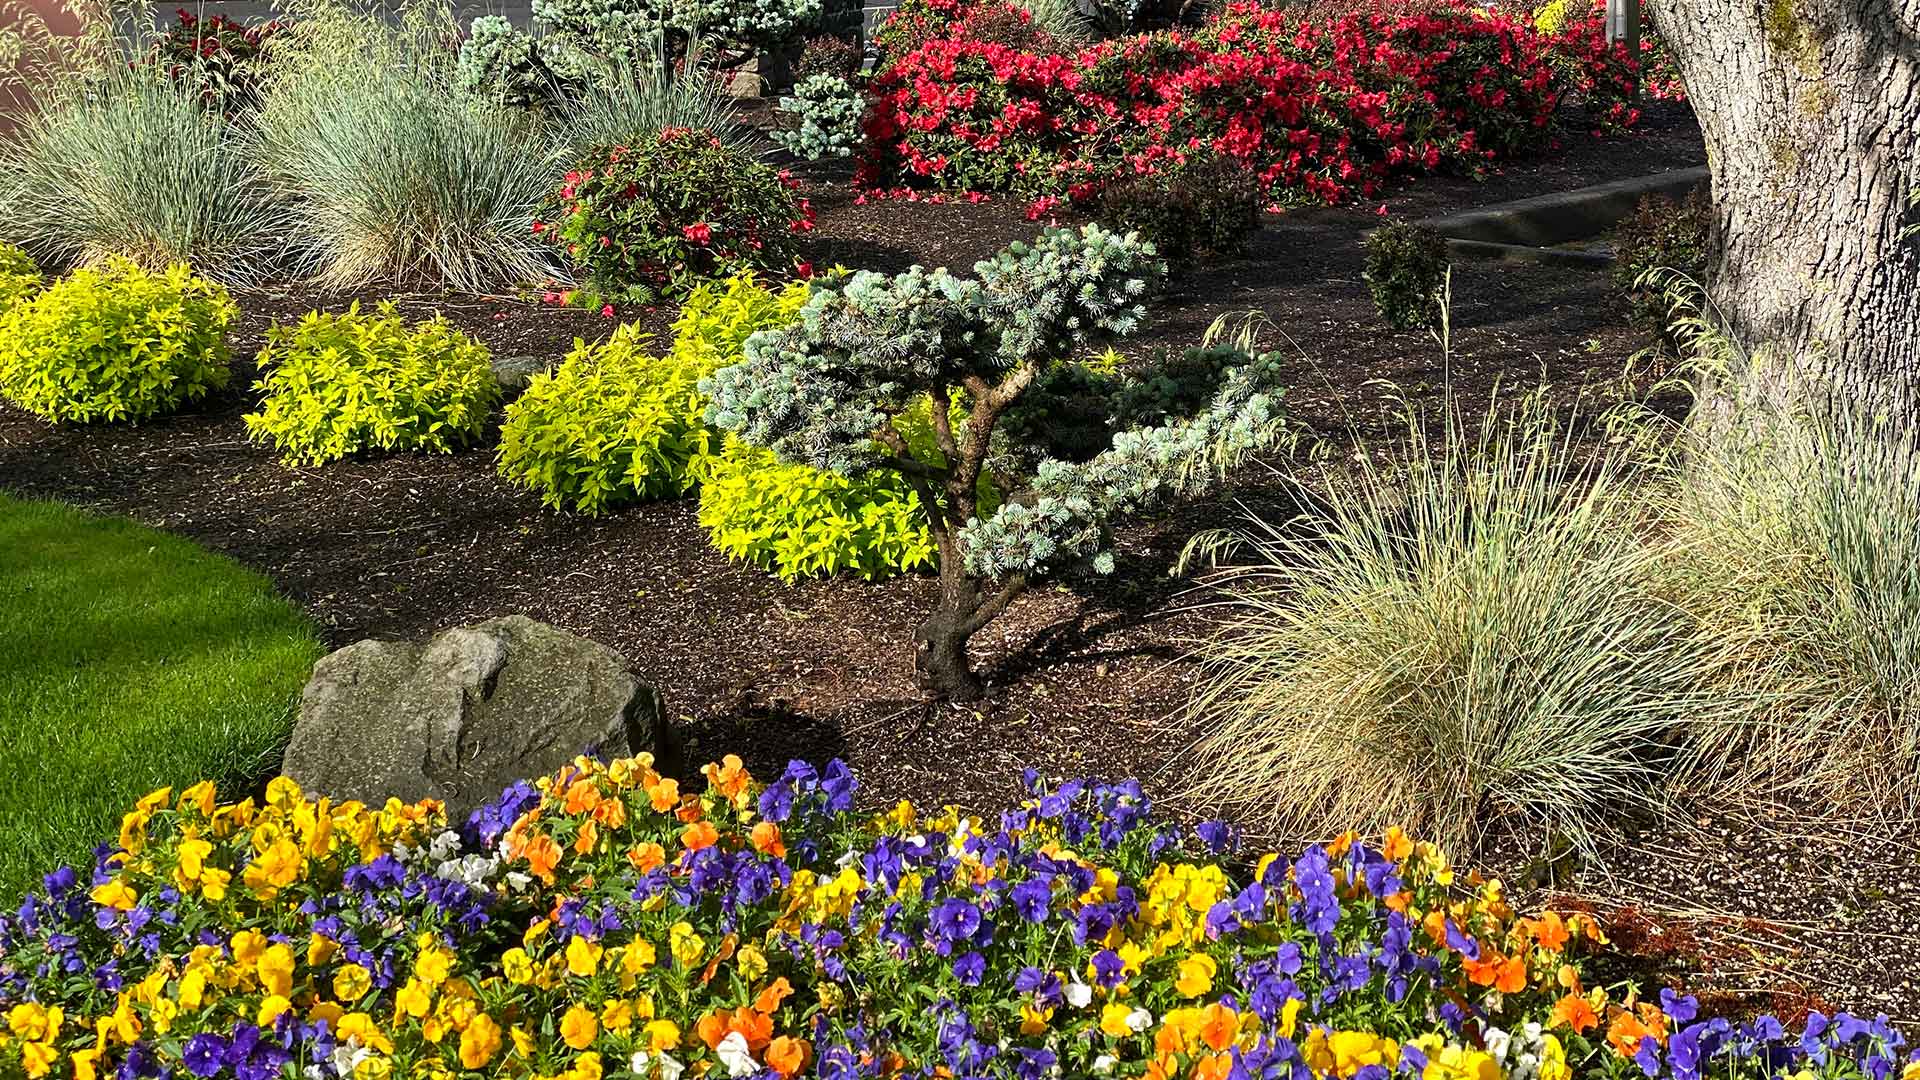 Landscape bed with shrubs, plants, and annual flowers in Vancouver, WA.